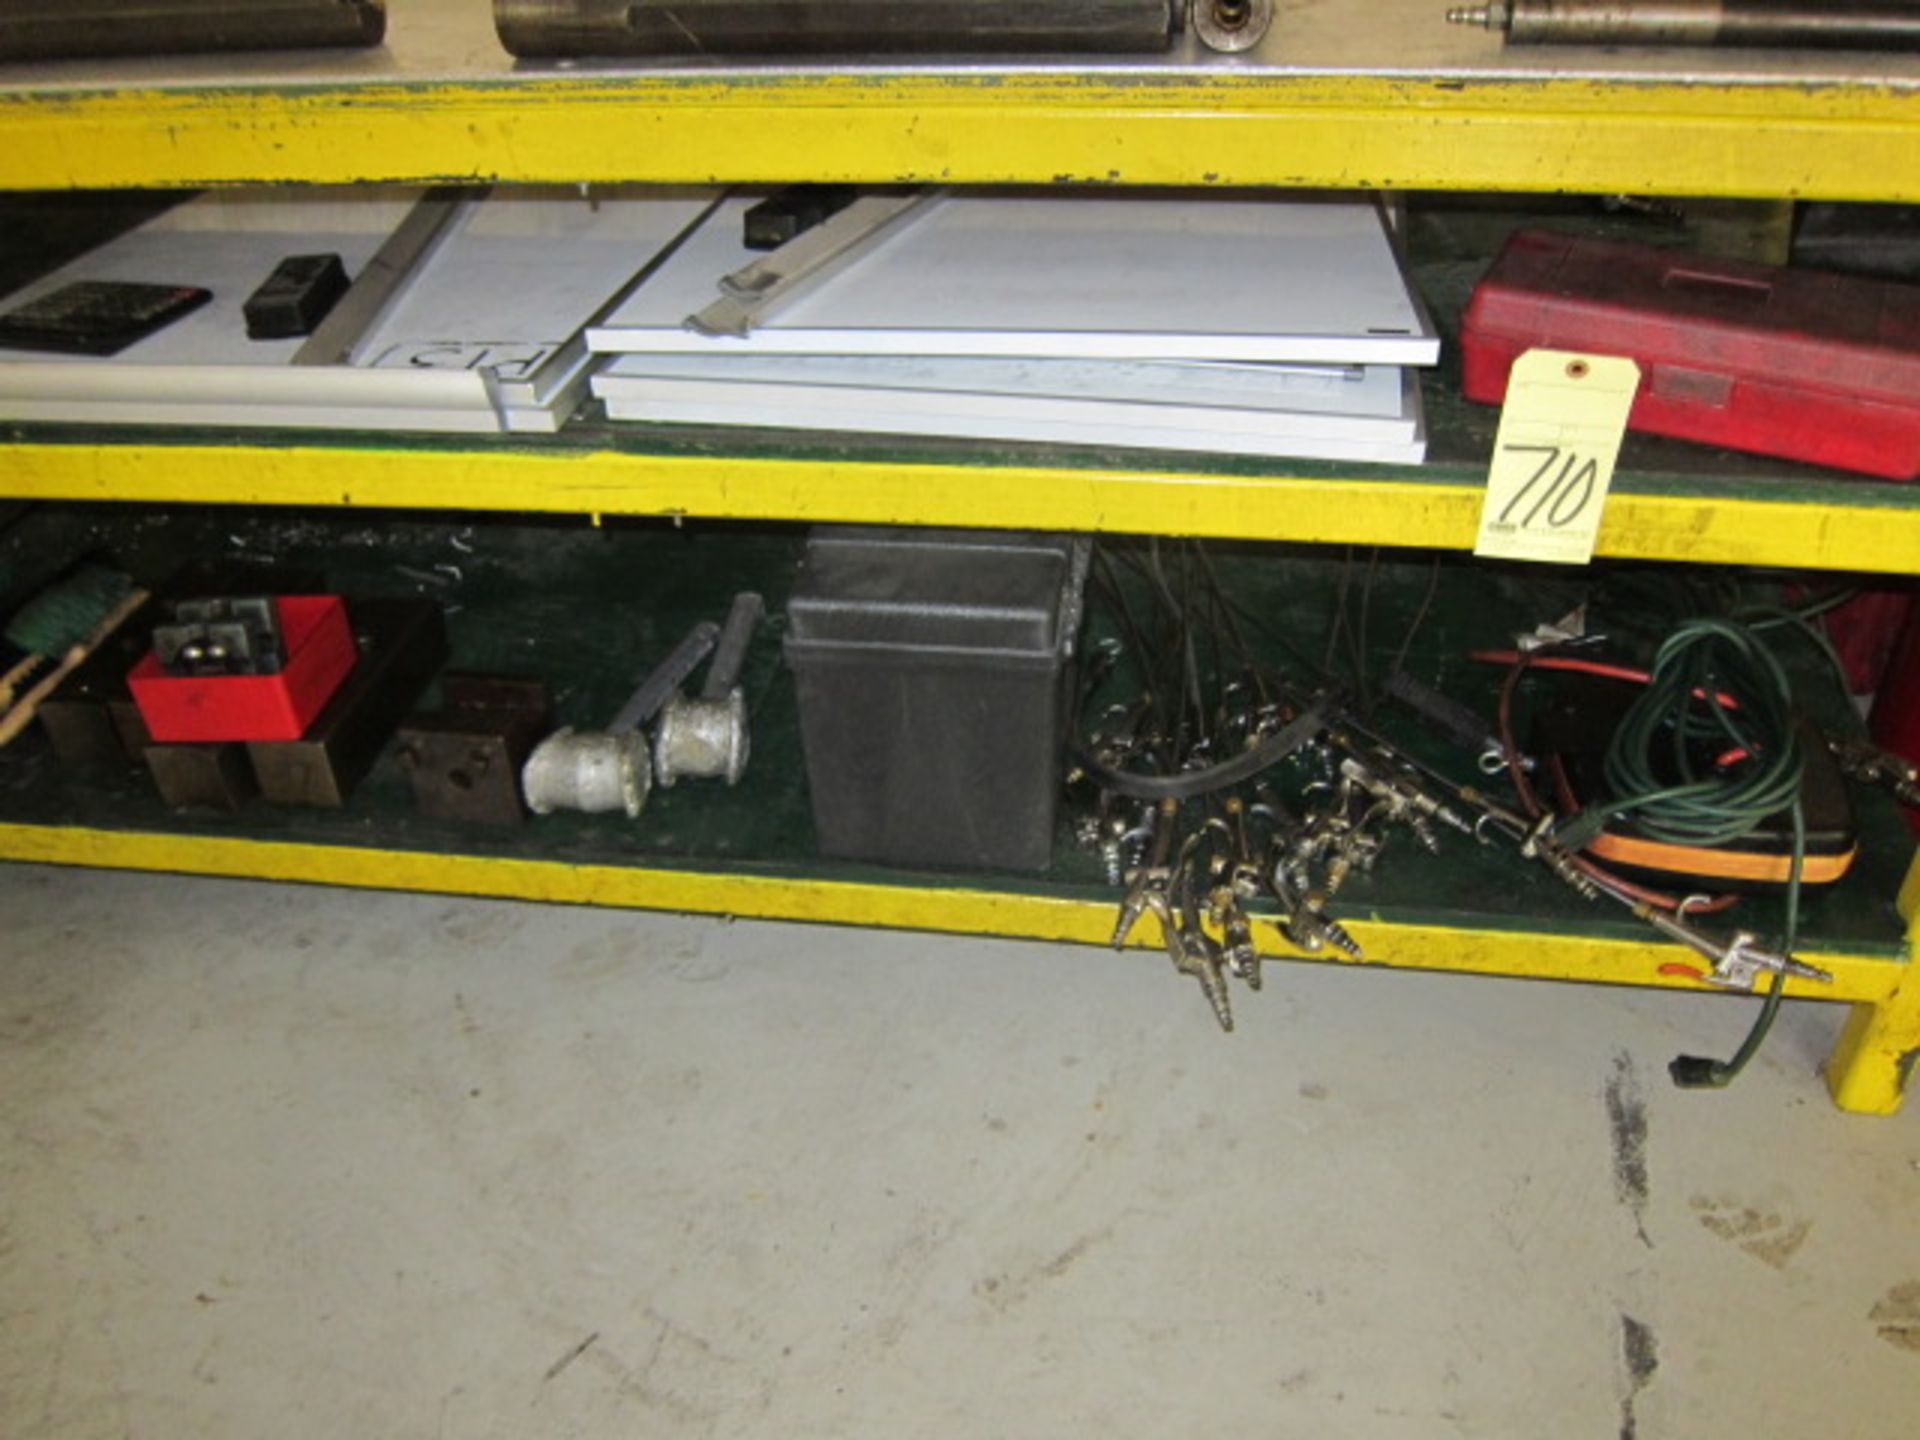 LOT OF HAND TOOLS, assorted (located under three benches) - Image 2 of 3